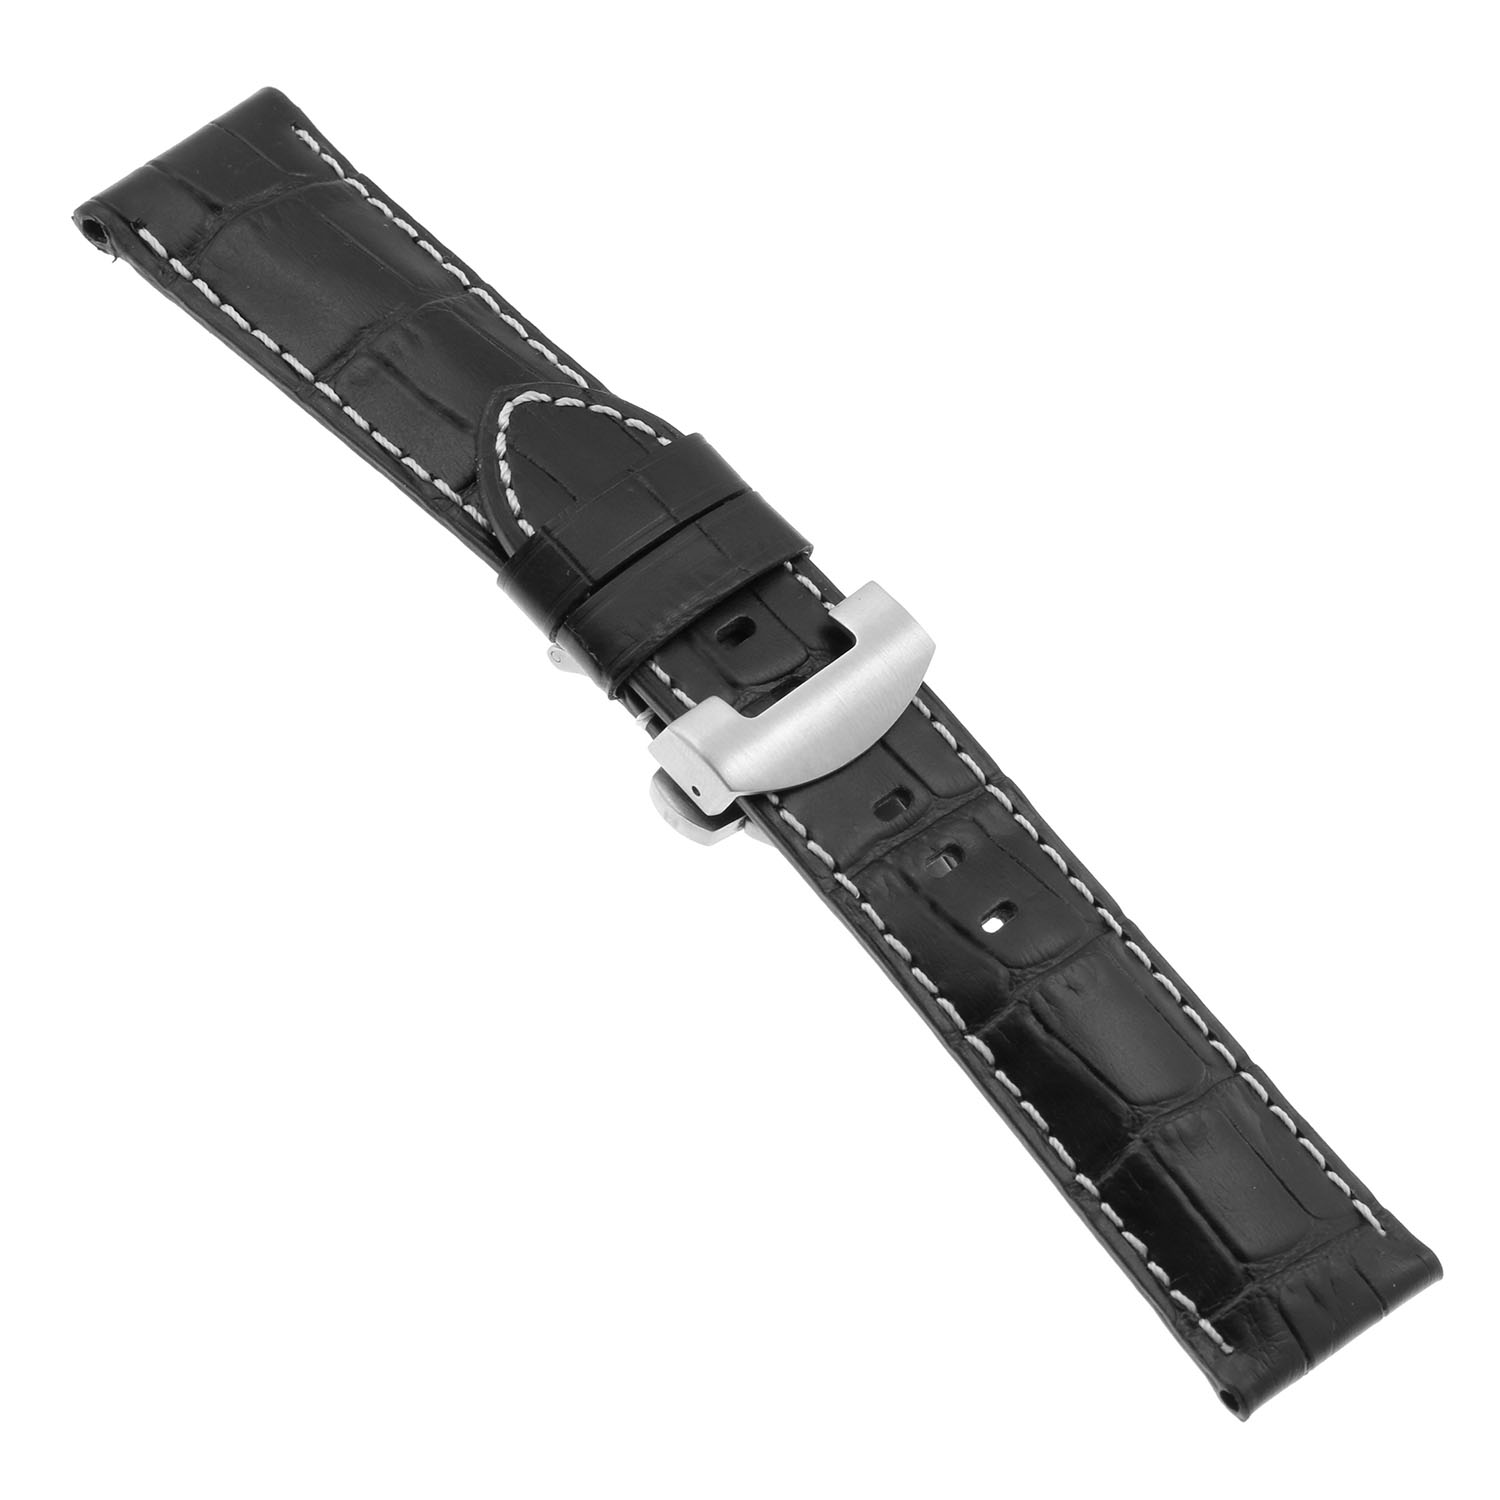 Ps4.1.bs Main Black Croc Leather Panerai Watch Band Strap With Brushed Silver Deployant Clasp